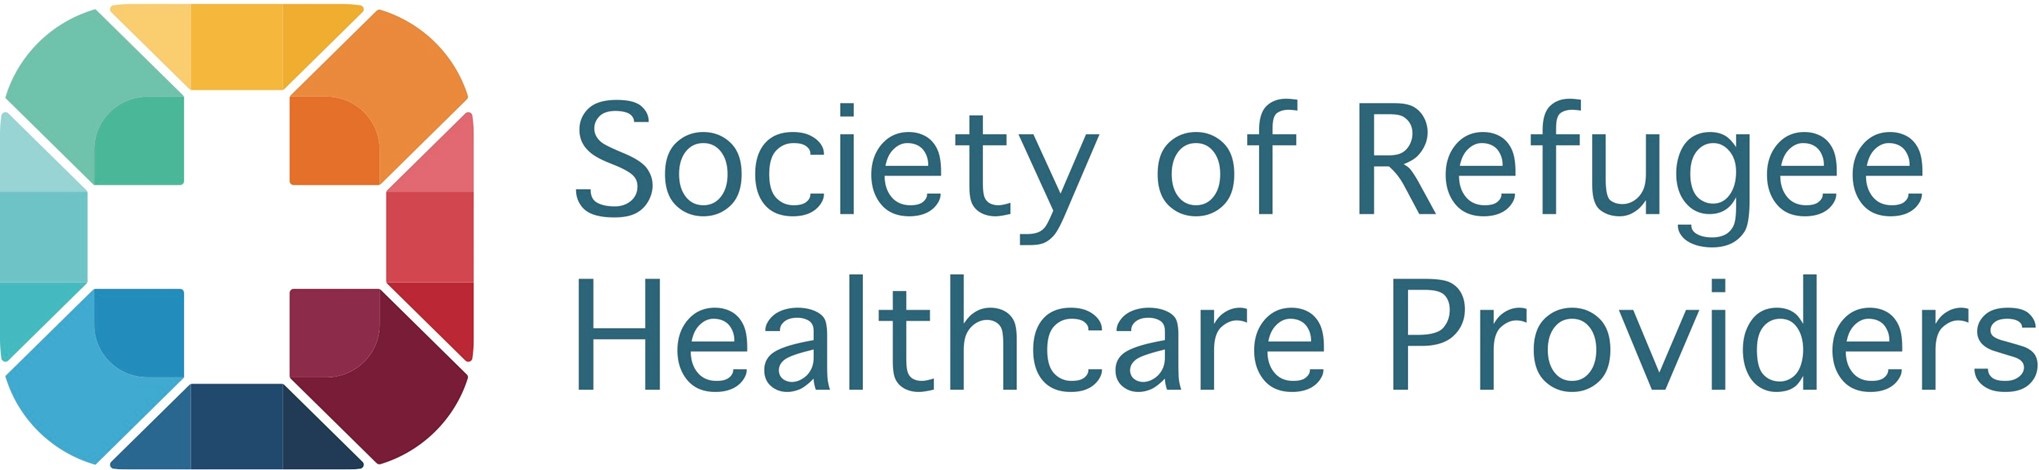 Societyof Refugee healthcare Providers